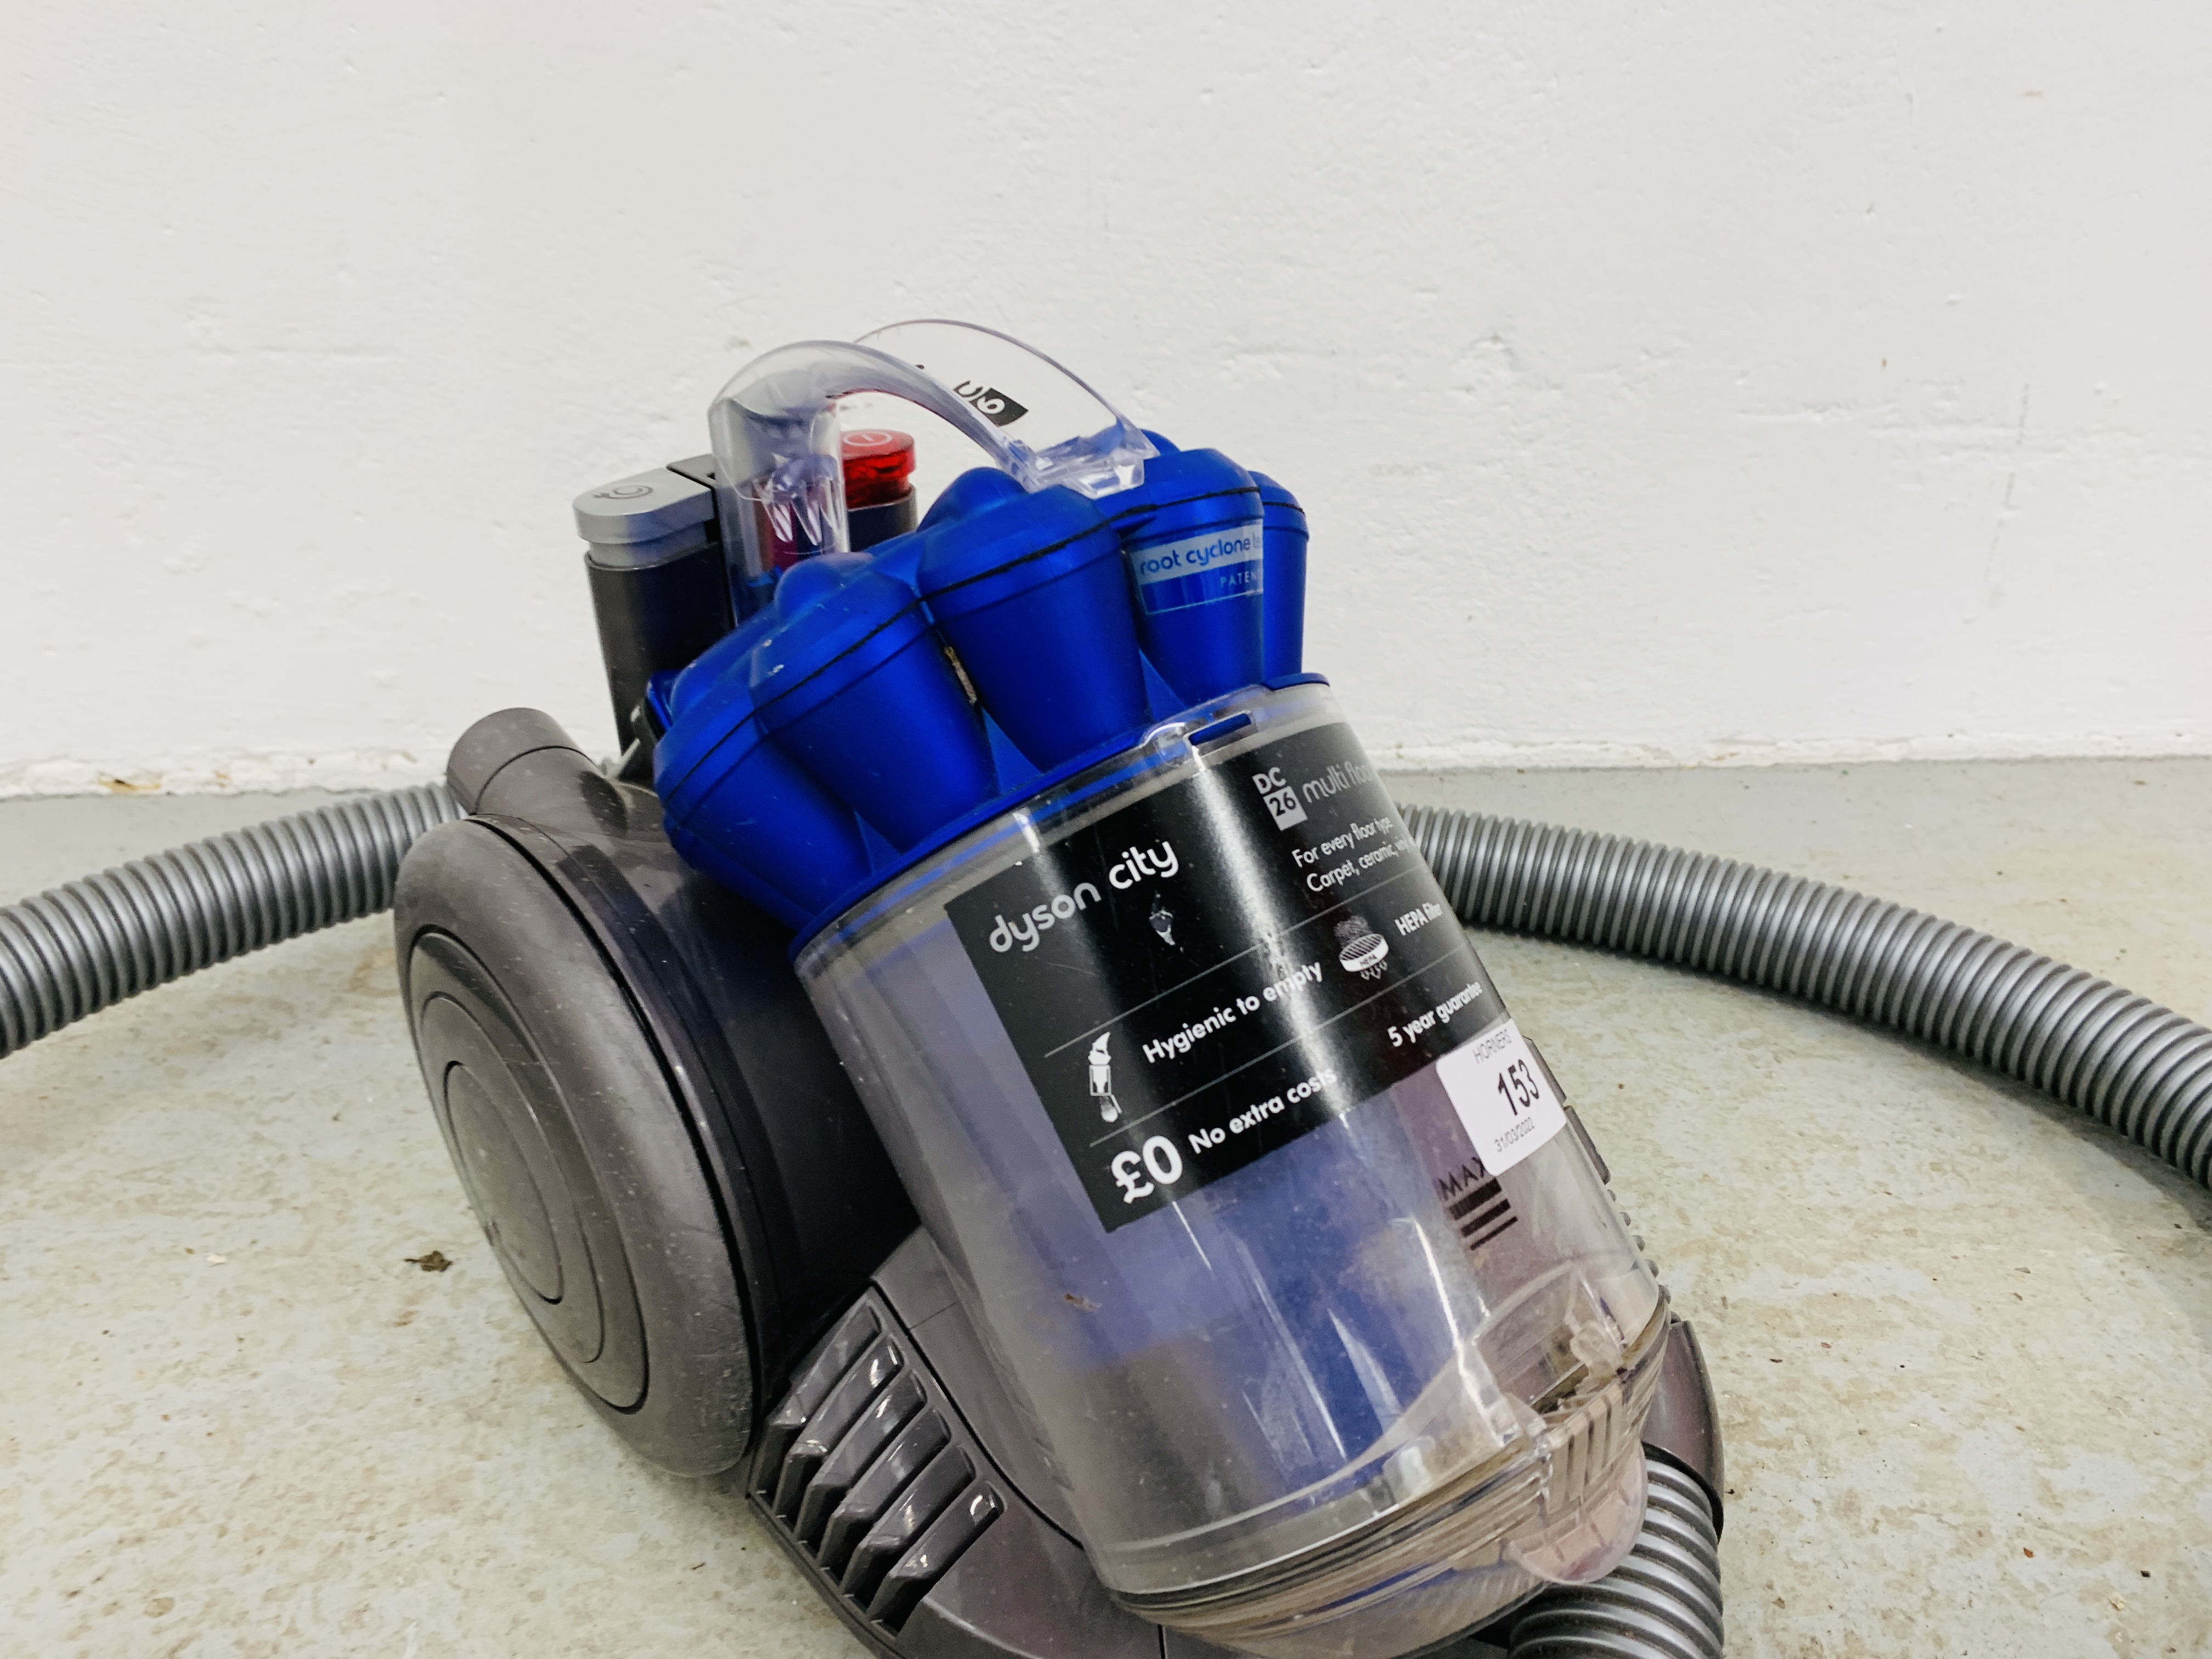 A DYSON DC26 COMPACT VACUUM CLEANER - SOLD AS SEEN. - Image 2 of 7